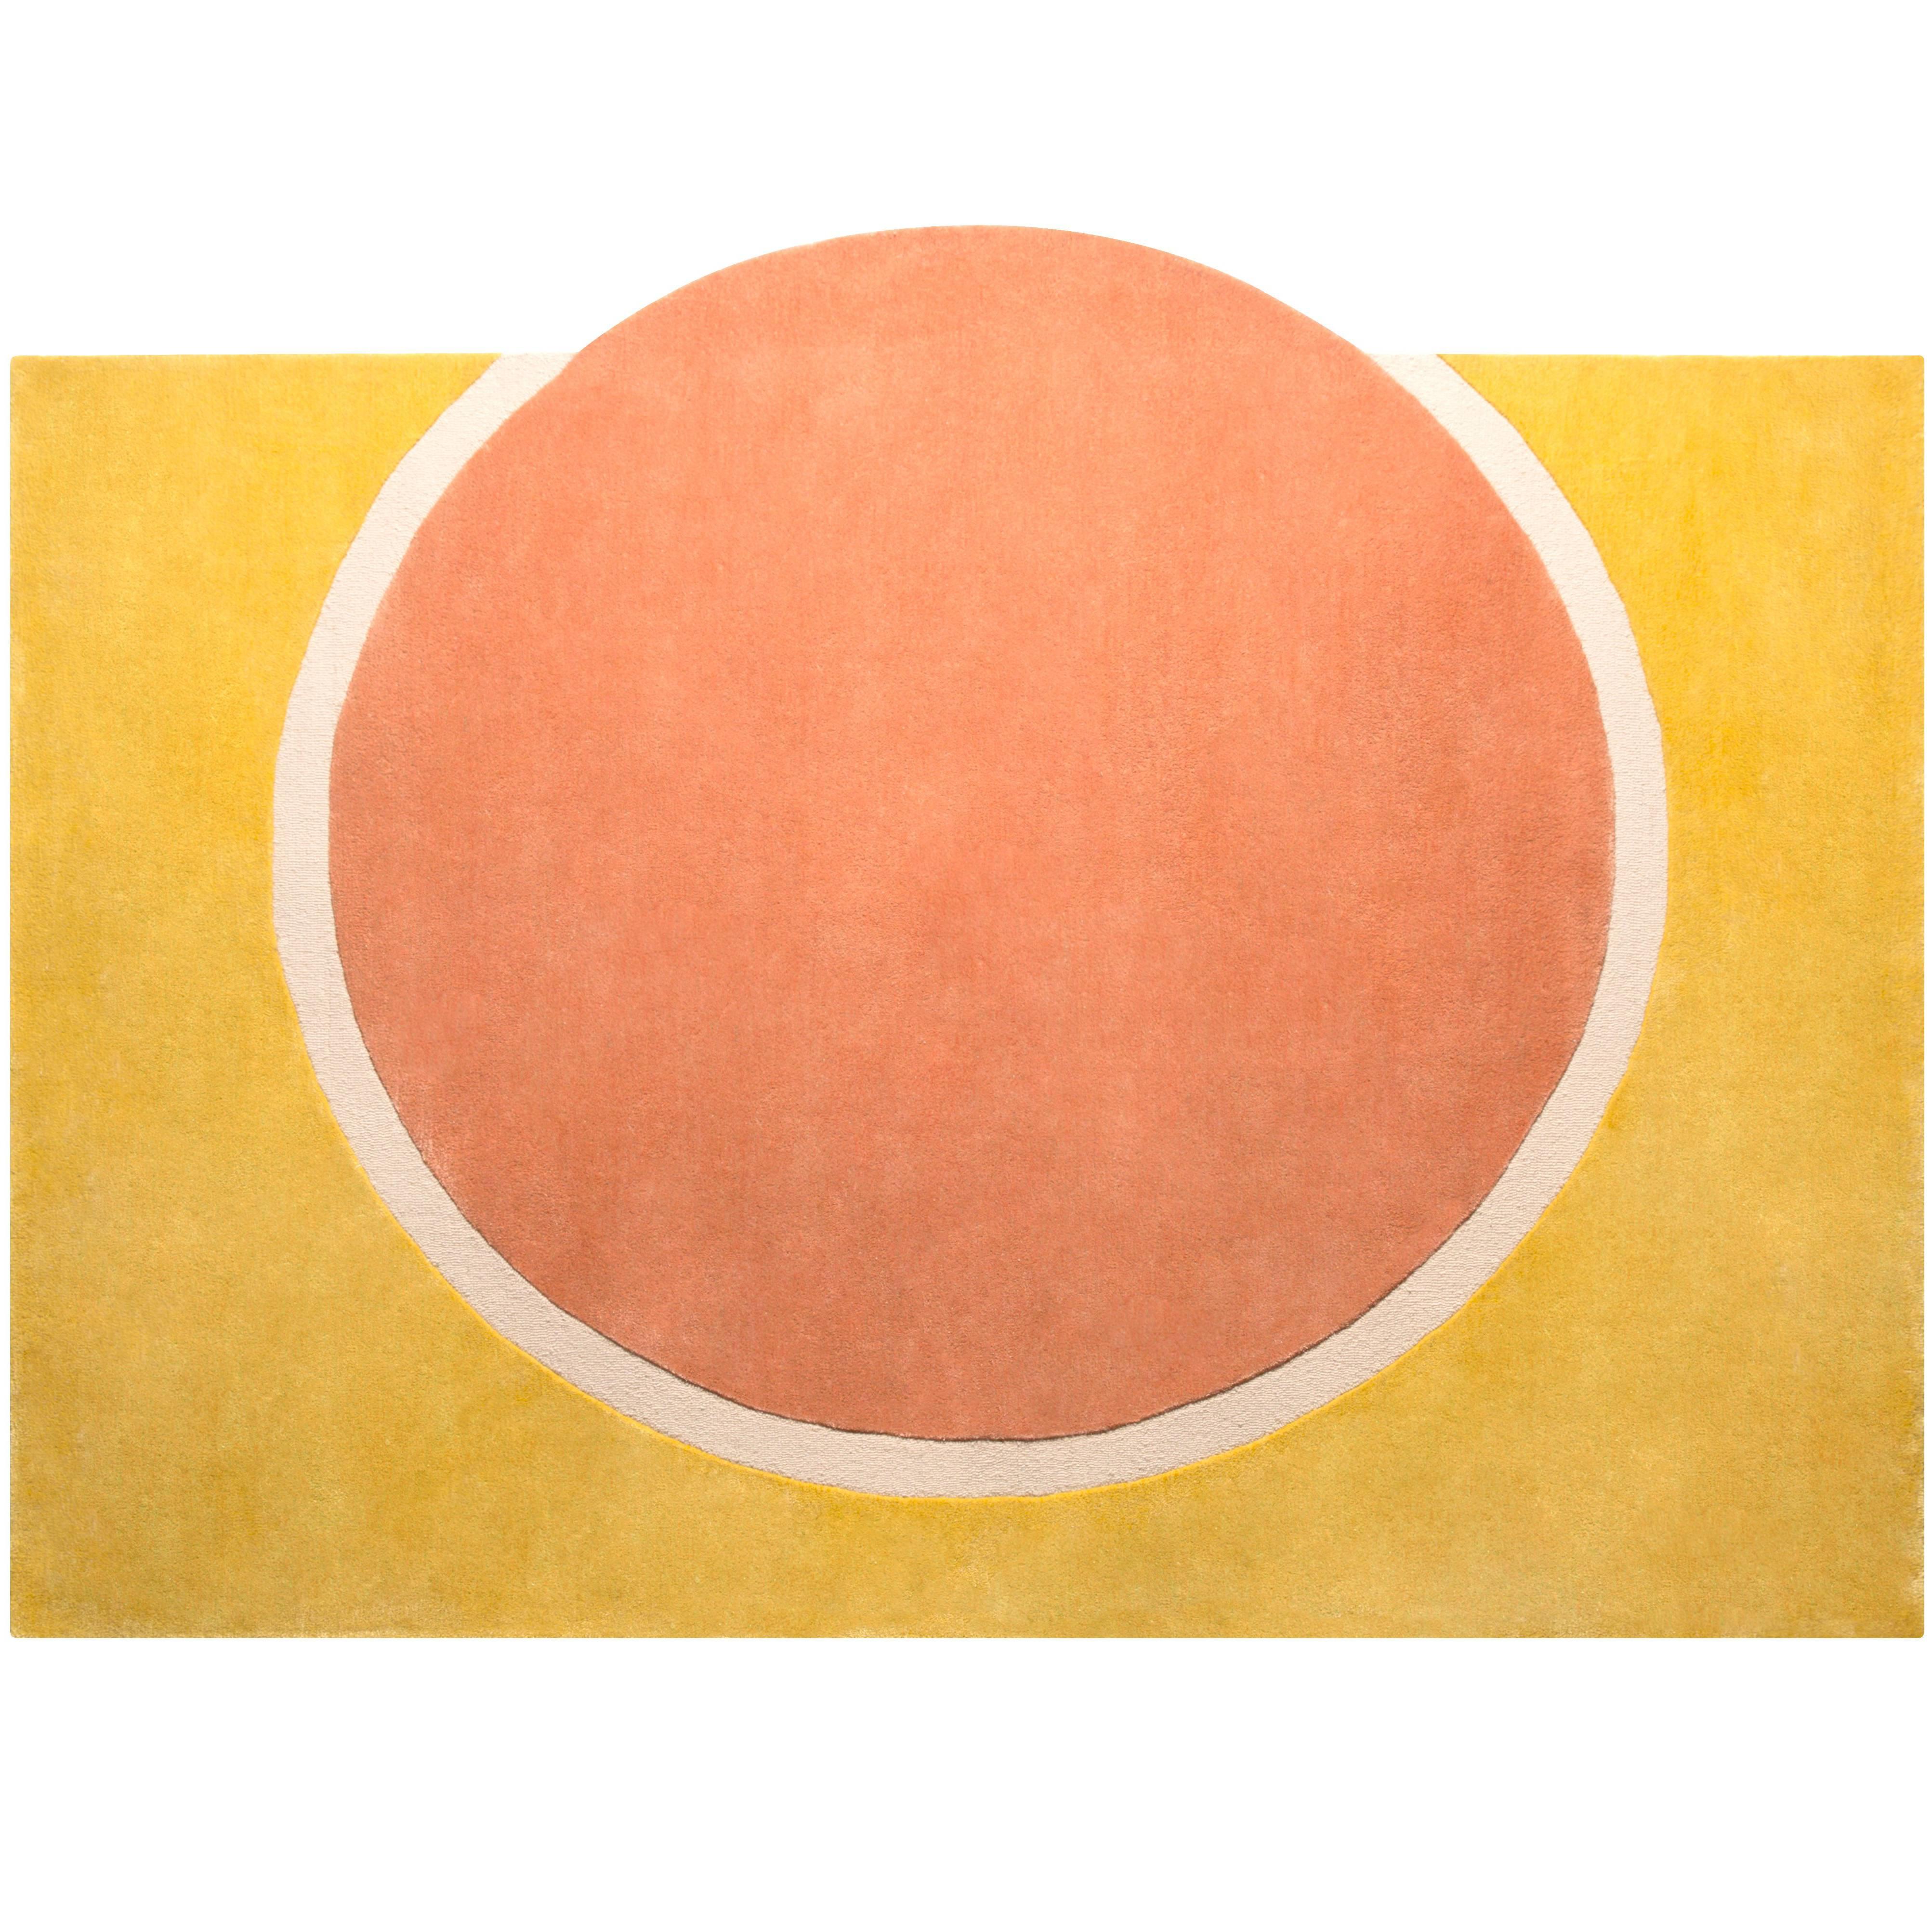  Sunset Rug by Pieces, Modern Round Hand Tufted Colorful Coral Yellow Rug Carpet